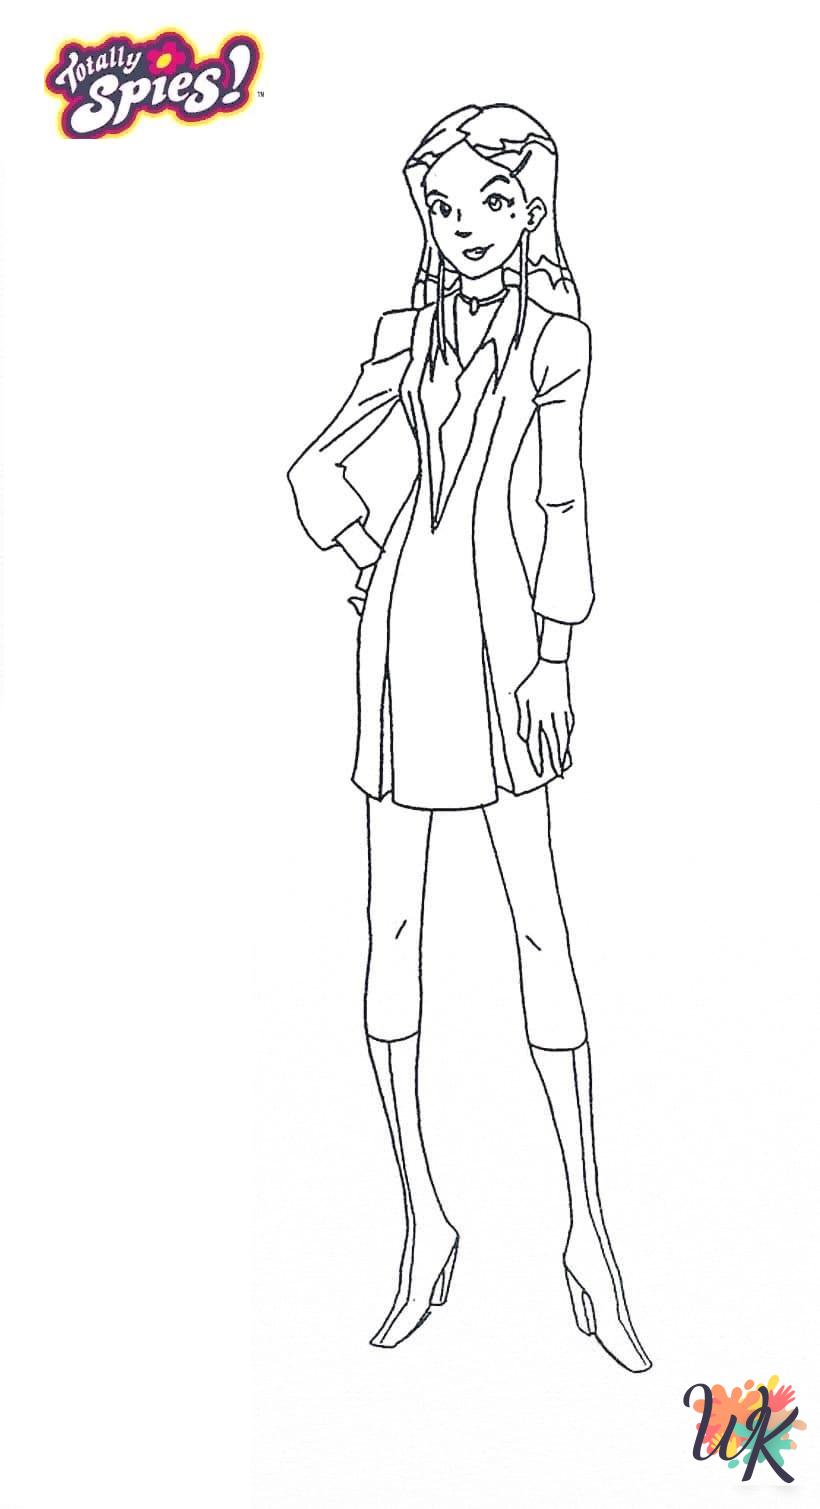 Totally Spies coloring pages easy